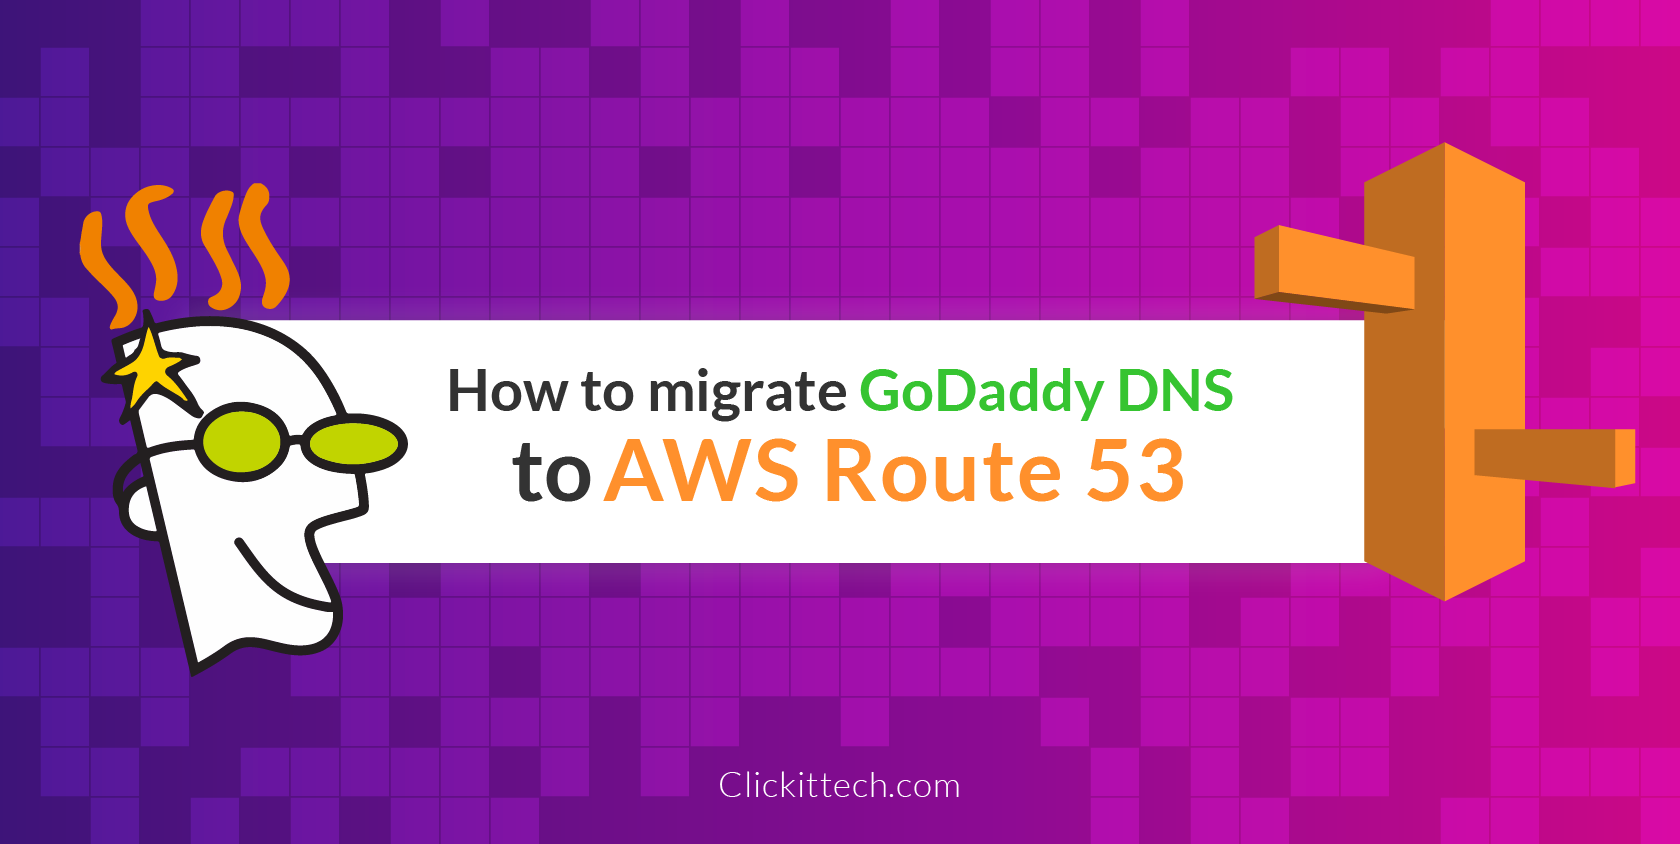 Image result for GoDaddy to migrate most of its IT infrastructure to Amazon Web Services